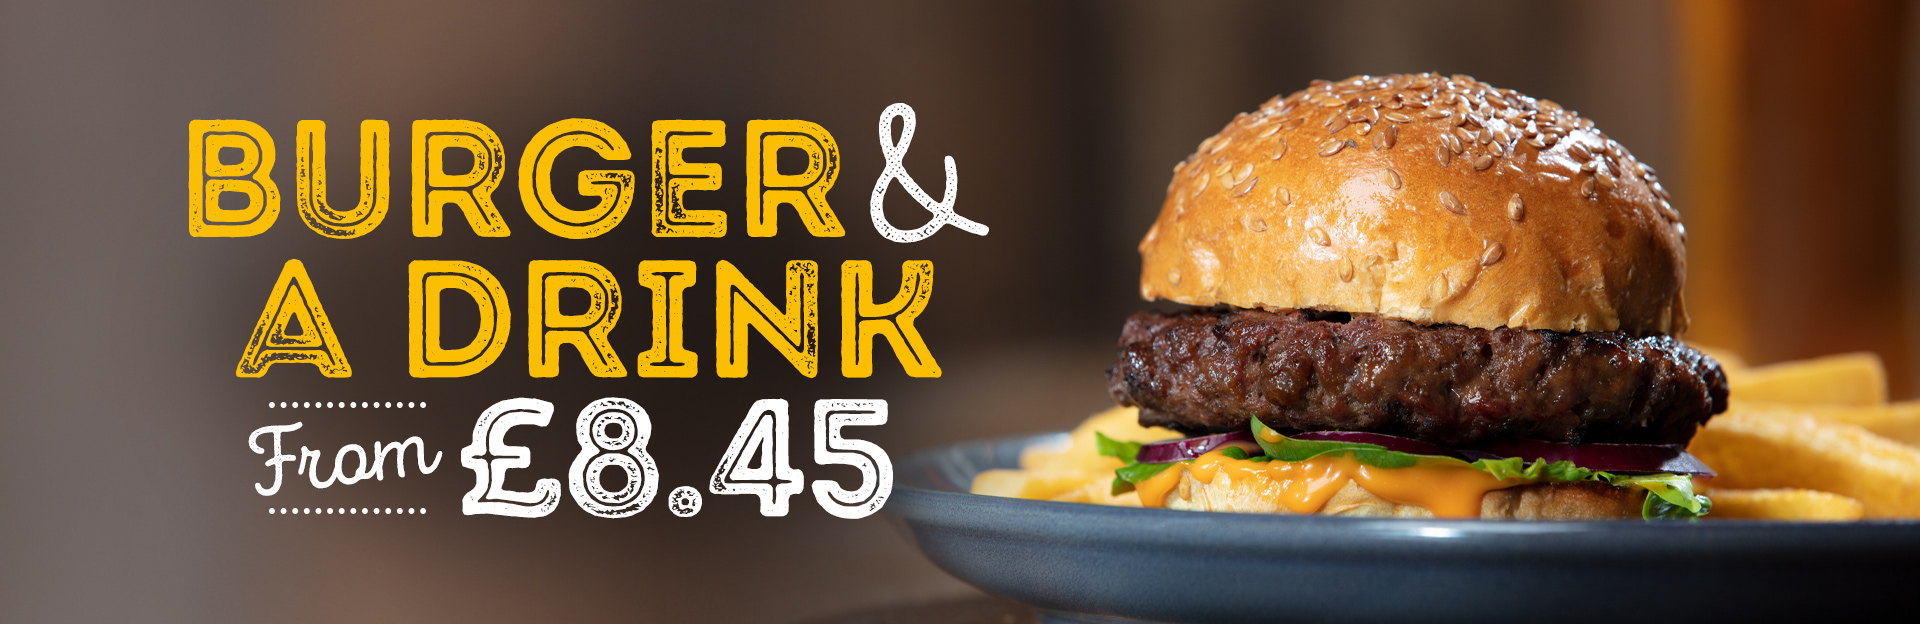 Burger & Drink at The Railway